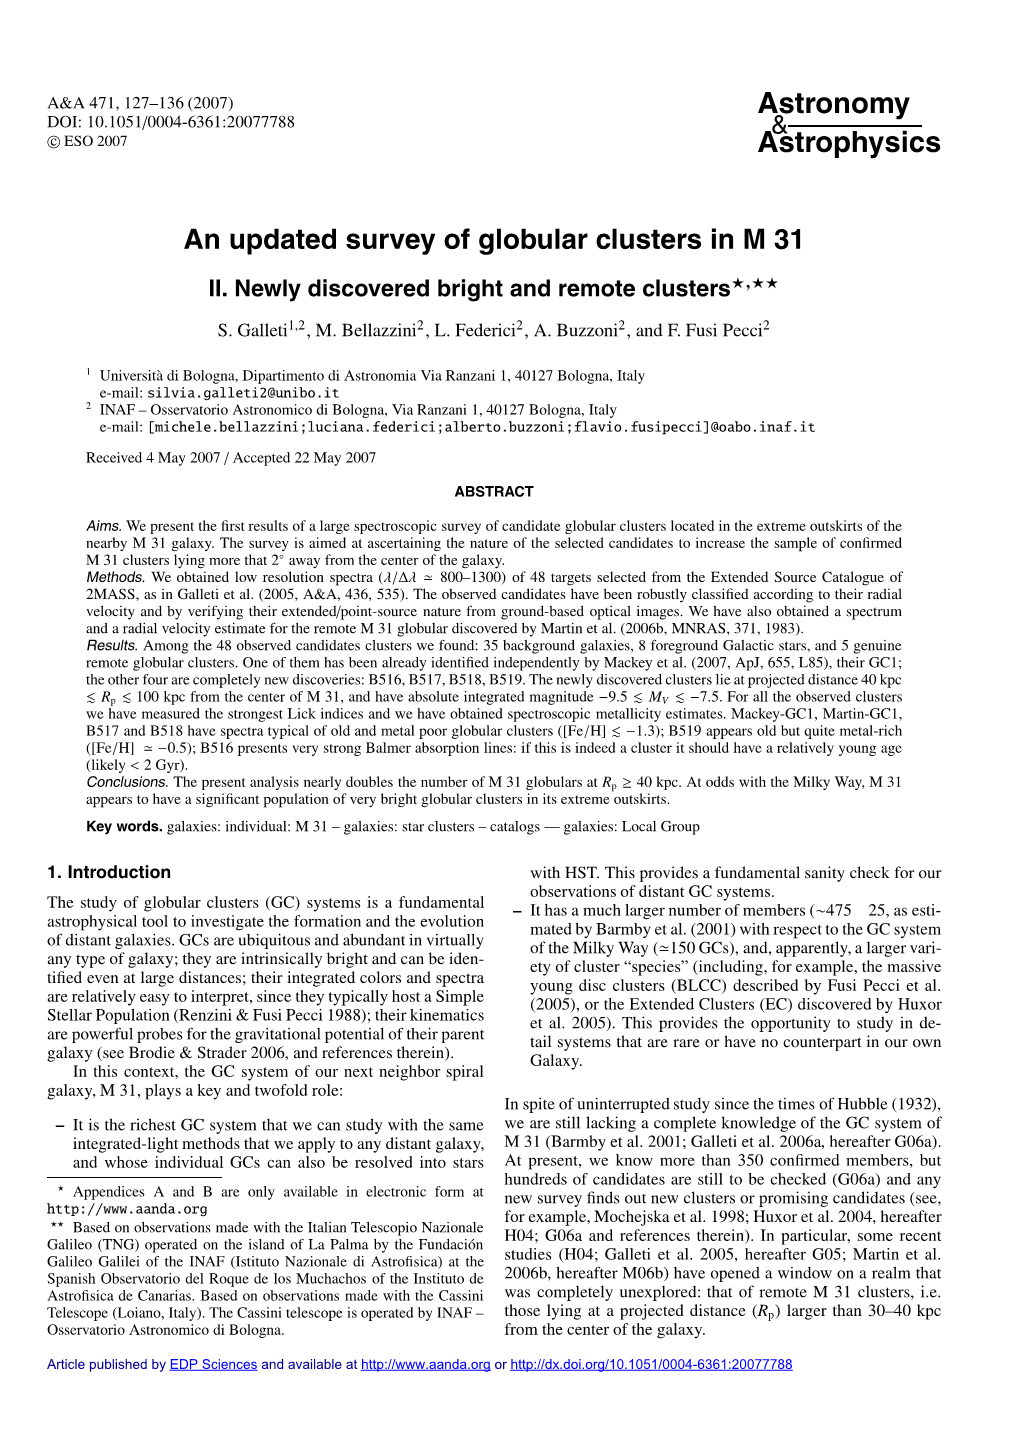 An Updated Survey of Globular Clusters in M 31 II